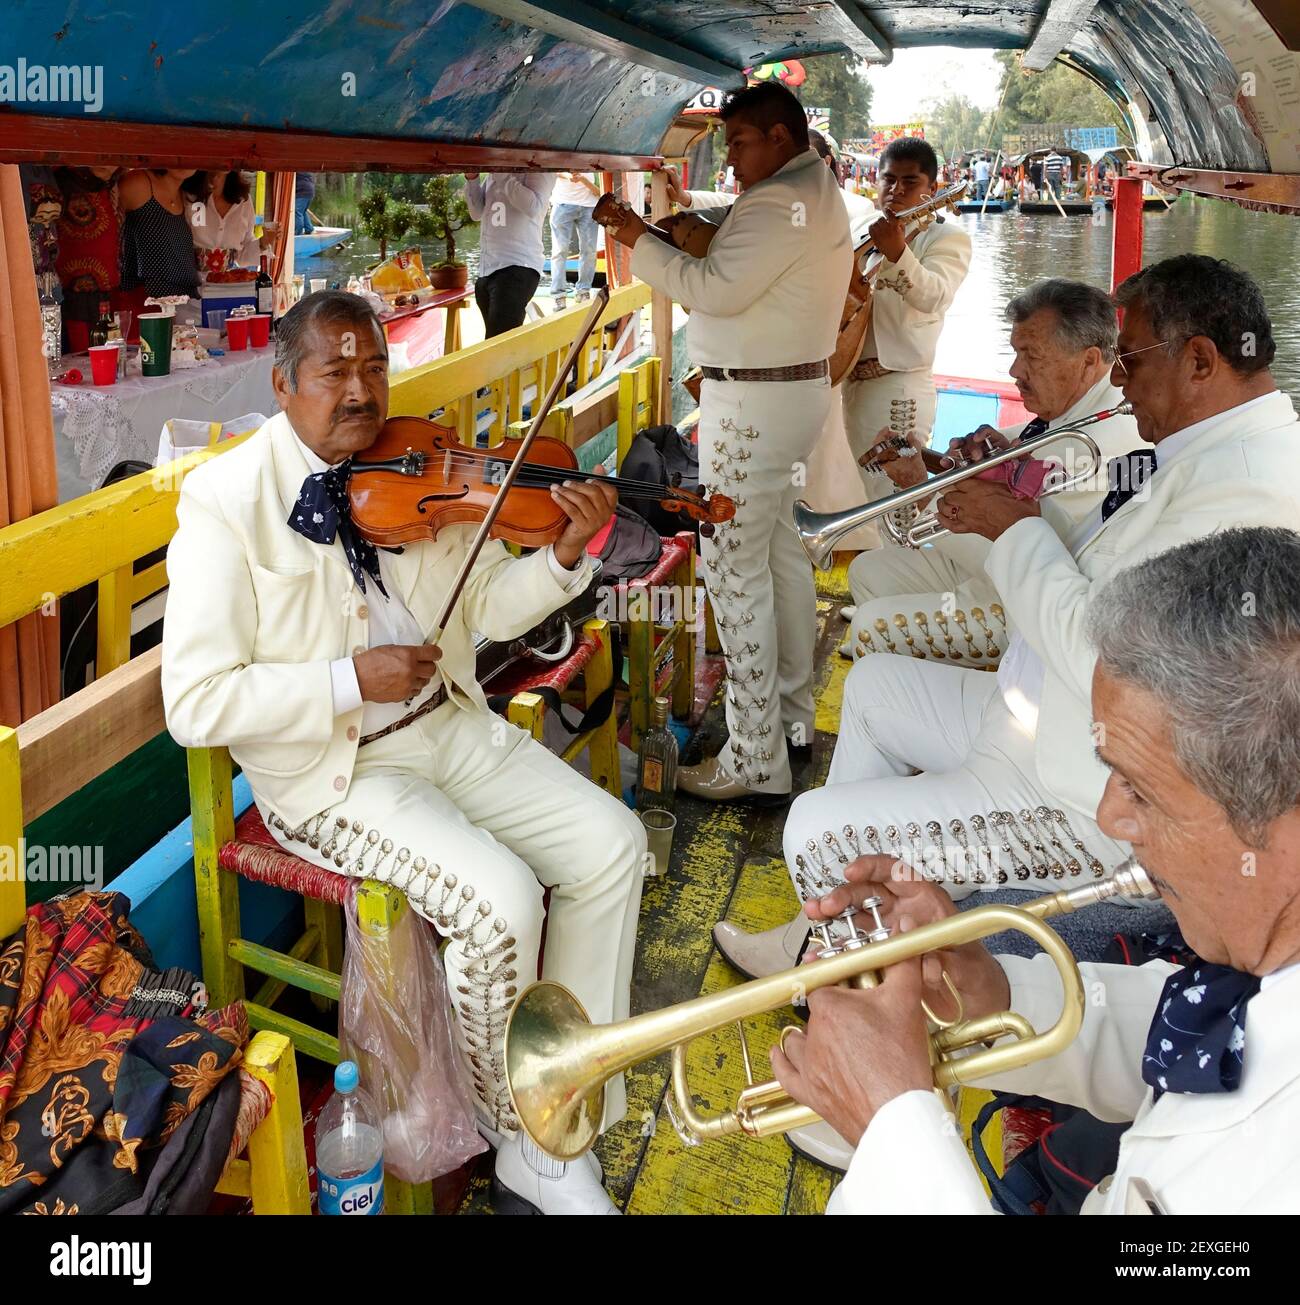 Mariachi musicians play for hire on the boats of Xochimilco canals, Mexico City, Mexico Stock Photo